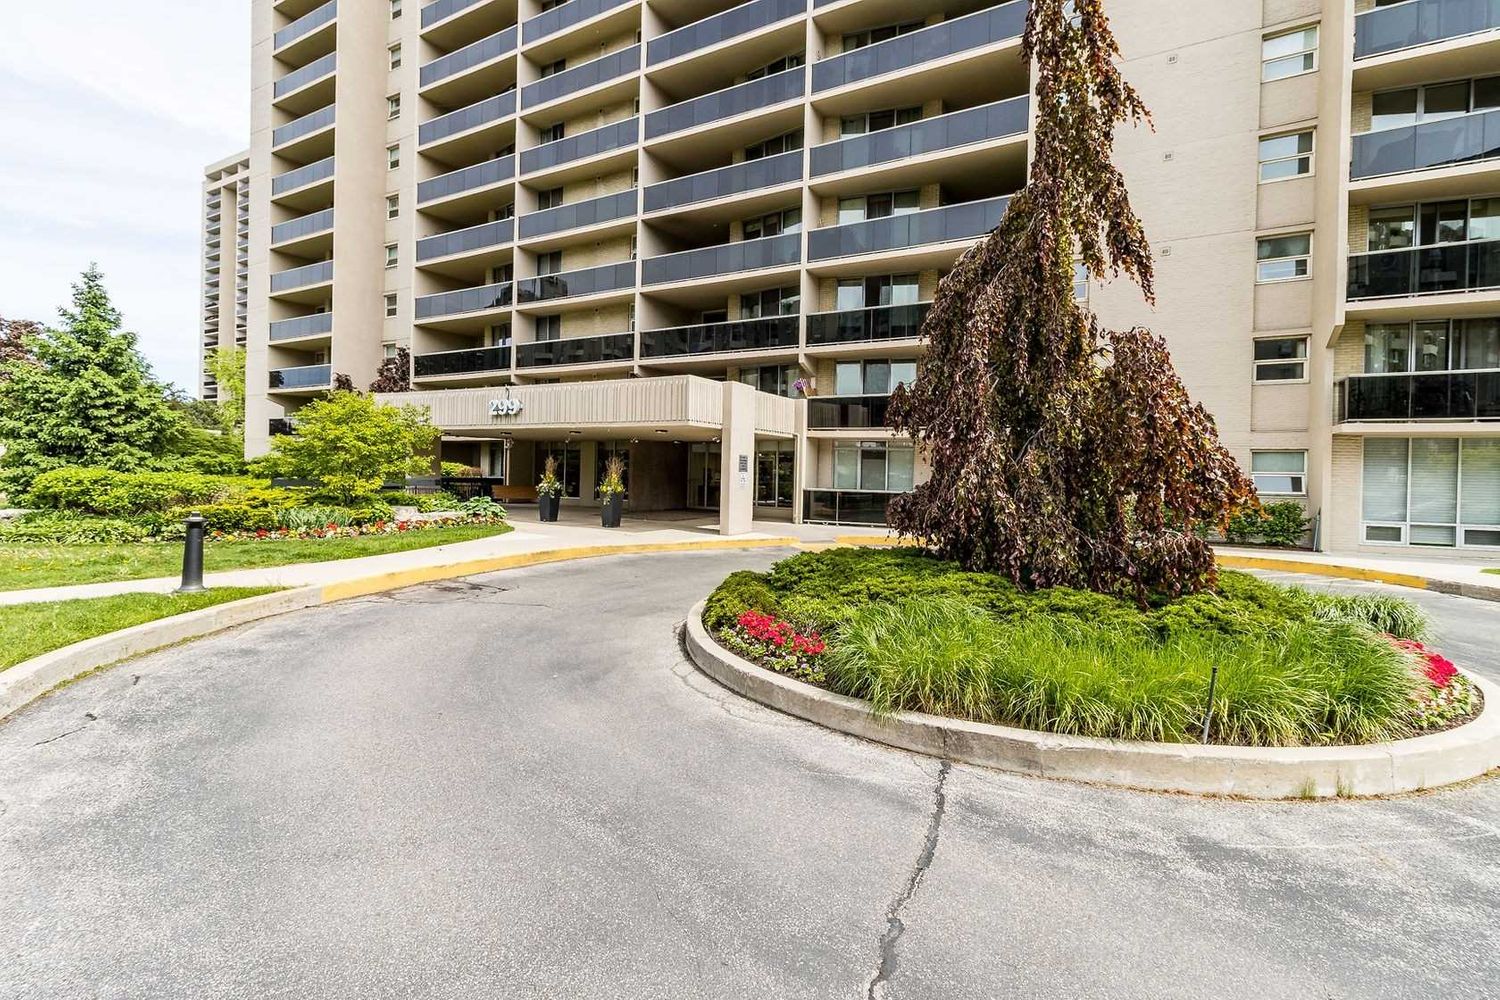 299 Mill Road. Millgate Manor Condos is located in  Etobicoke, Toronto - image #3 of 3